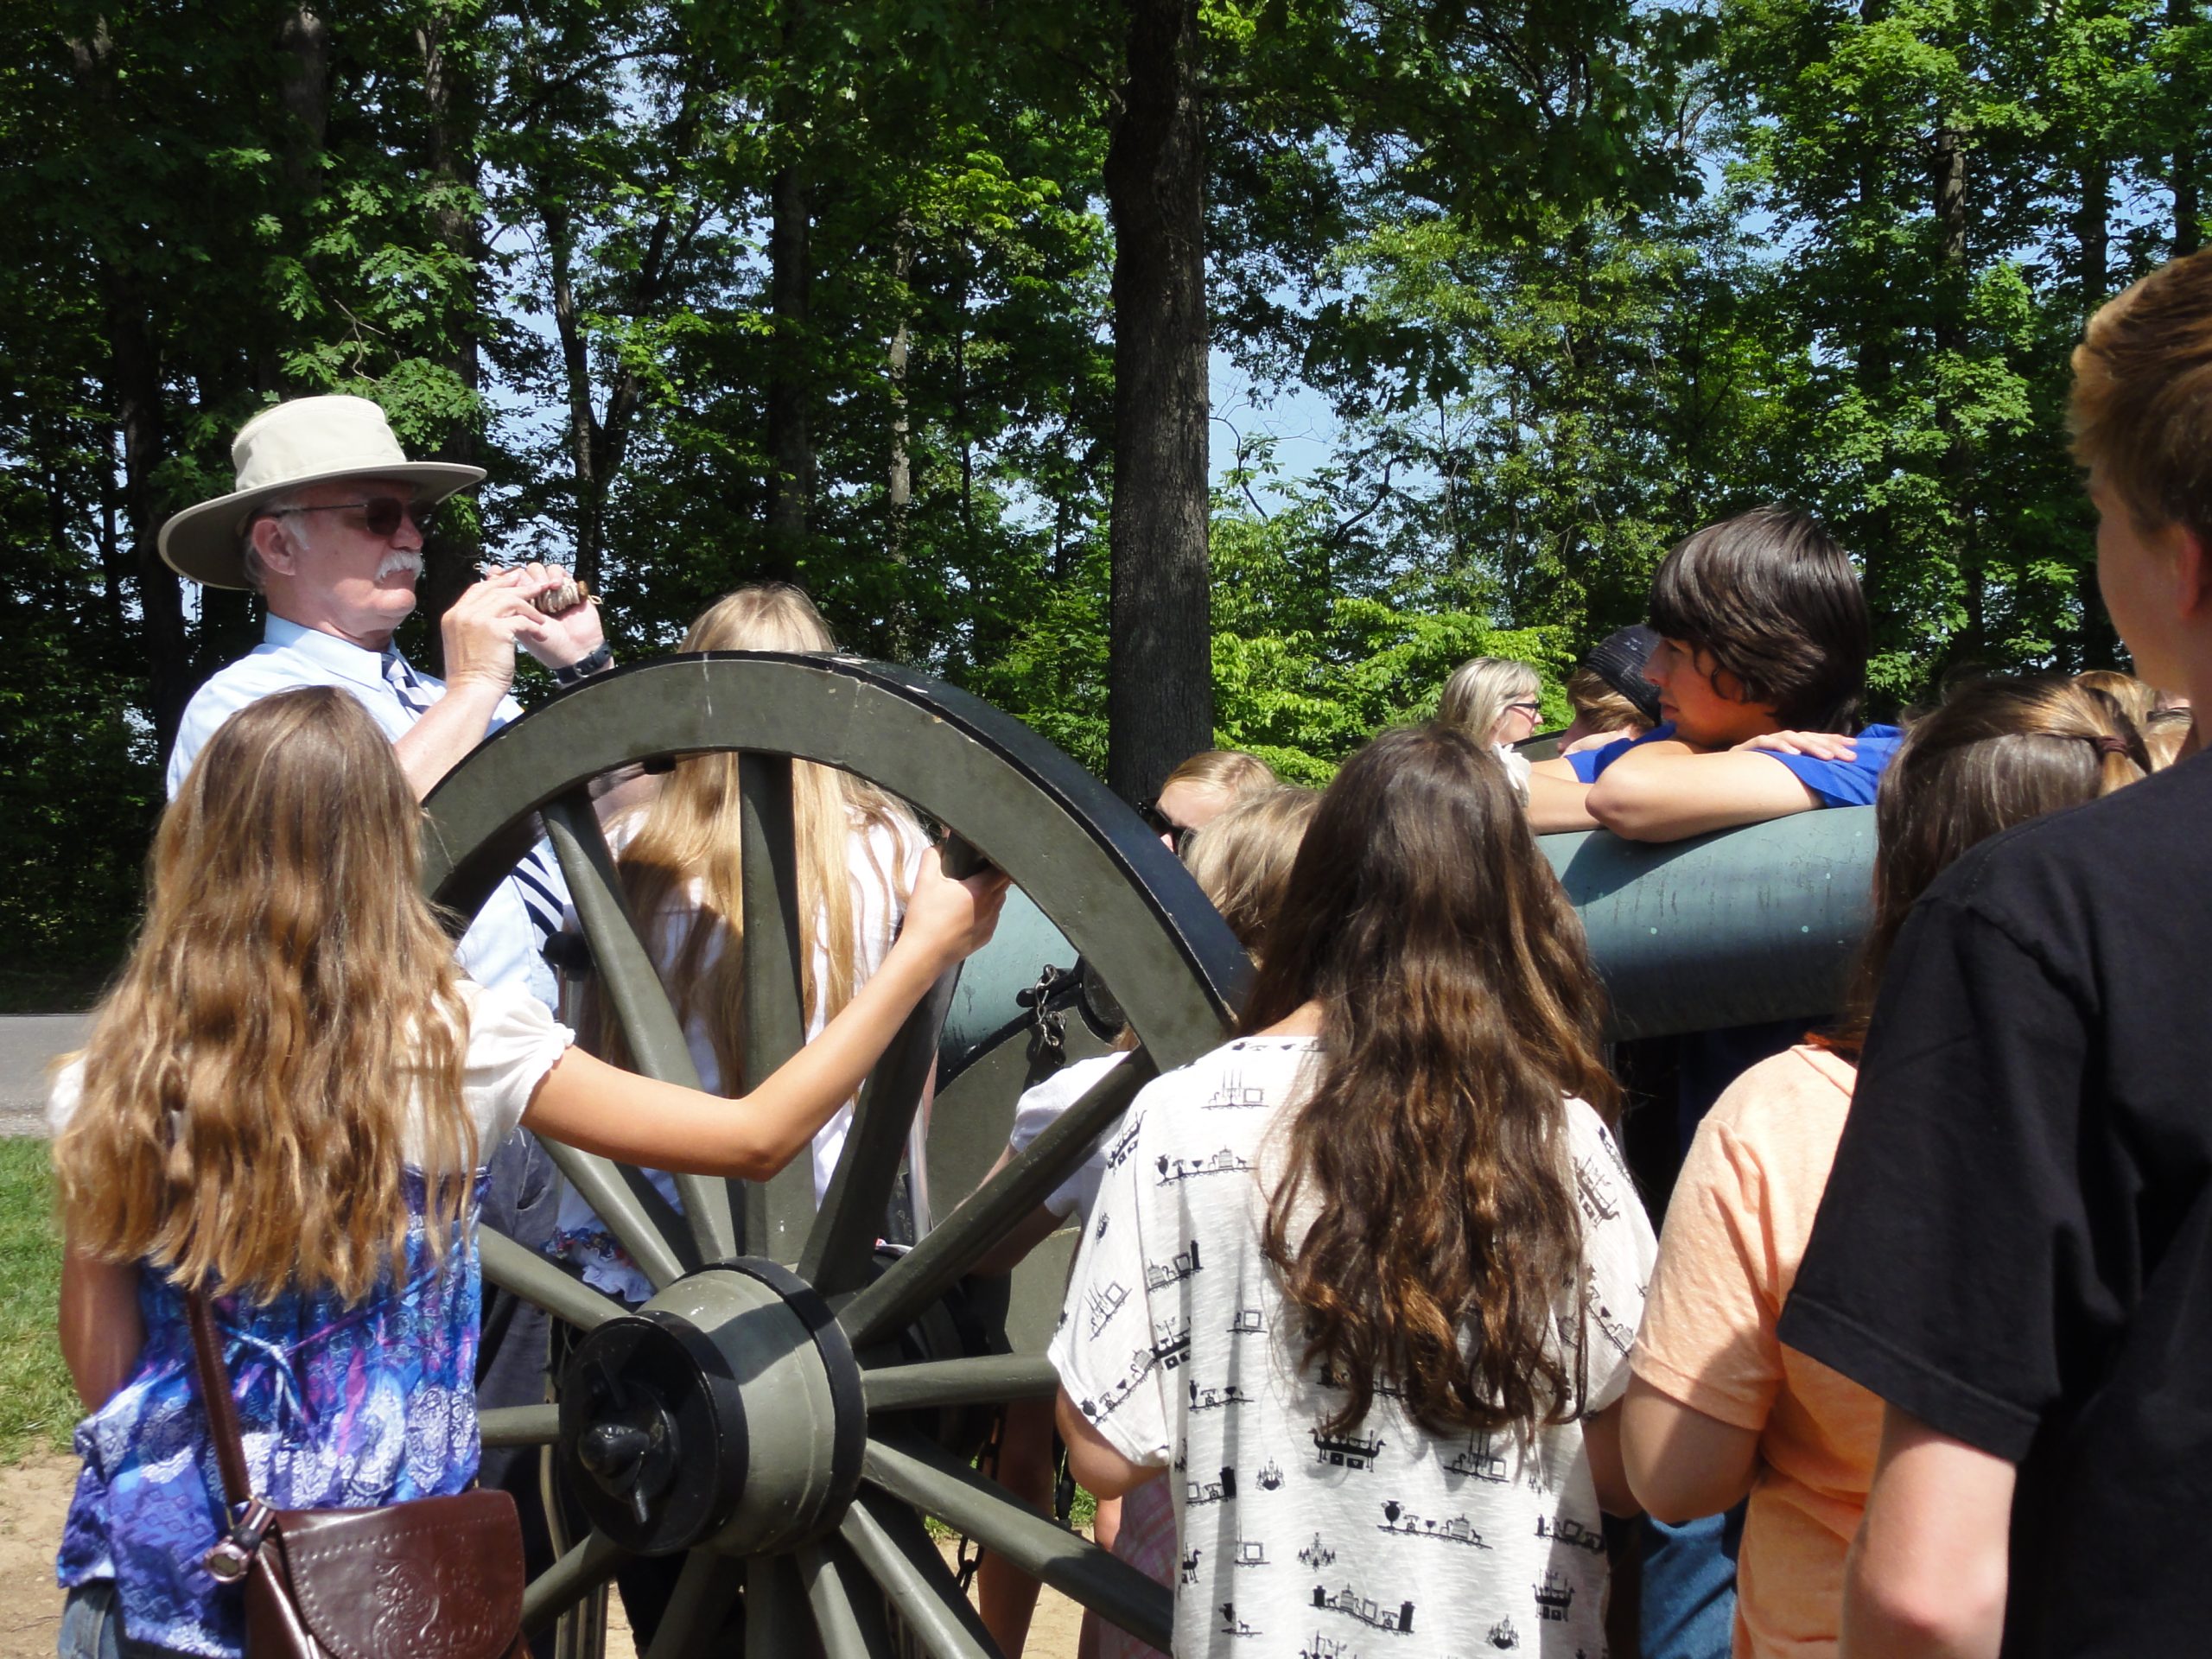 Middle school students standing around a civil war canon listing to an educational tour guide